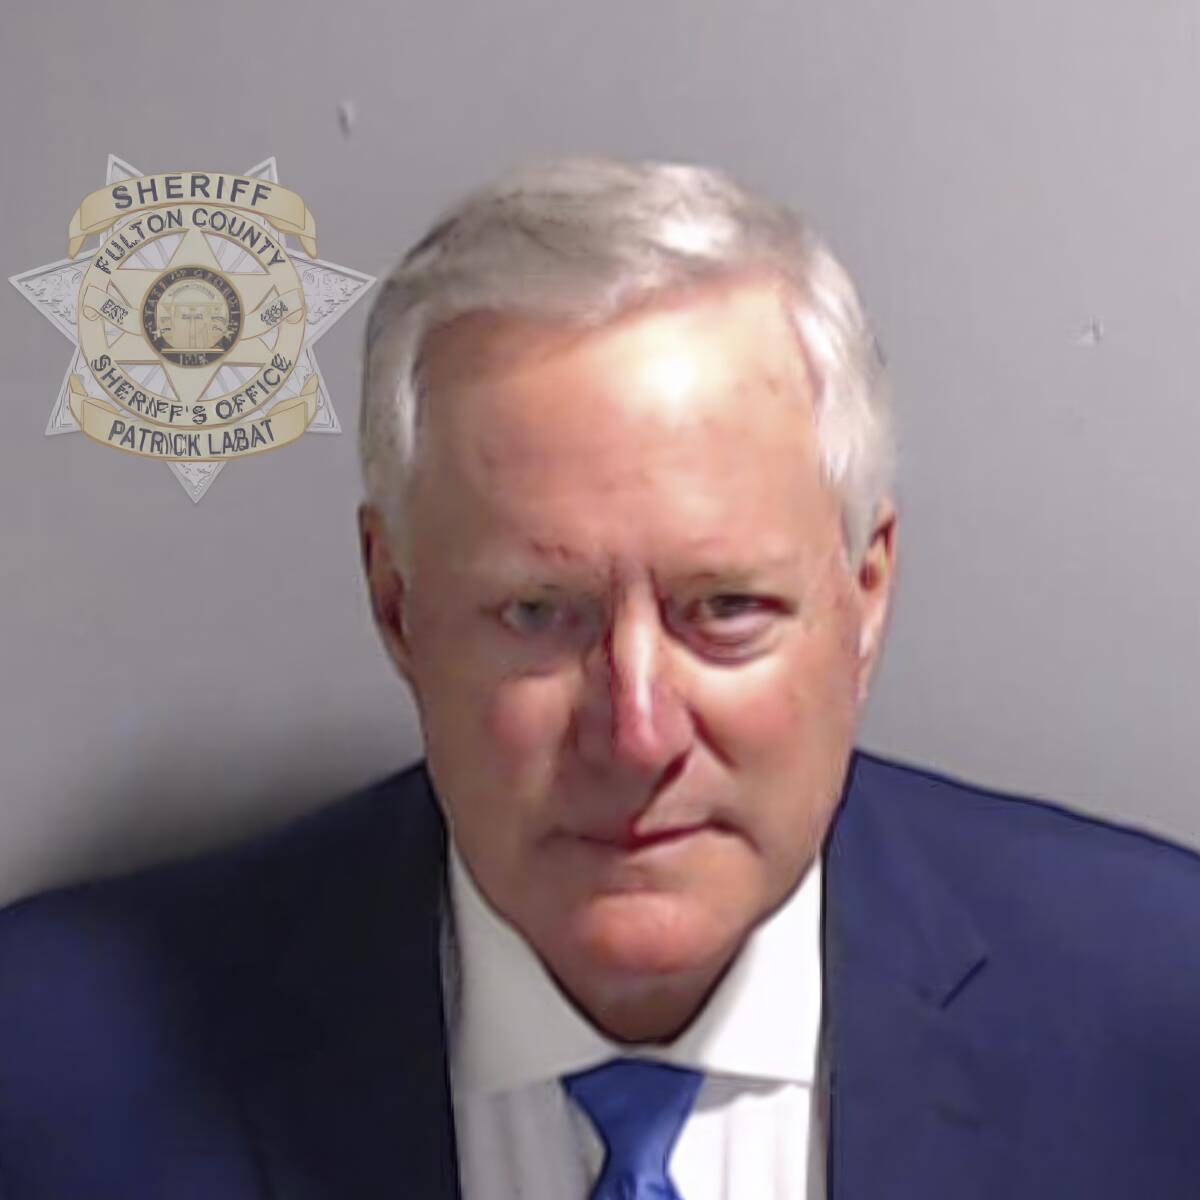 Booking photo of Mark Meadows in a blue suit and tie.